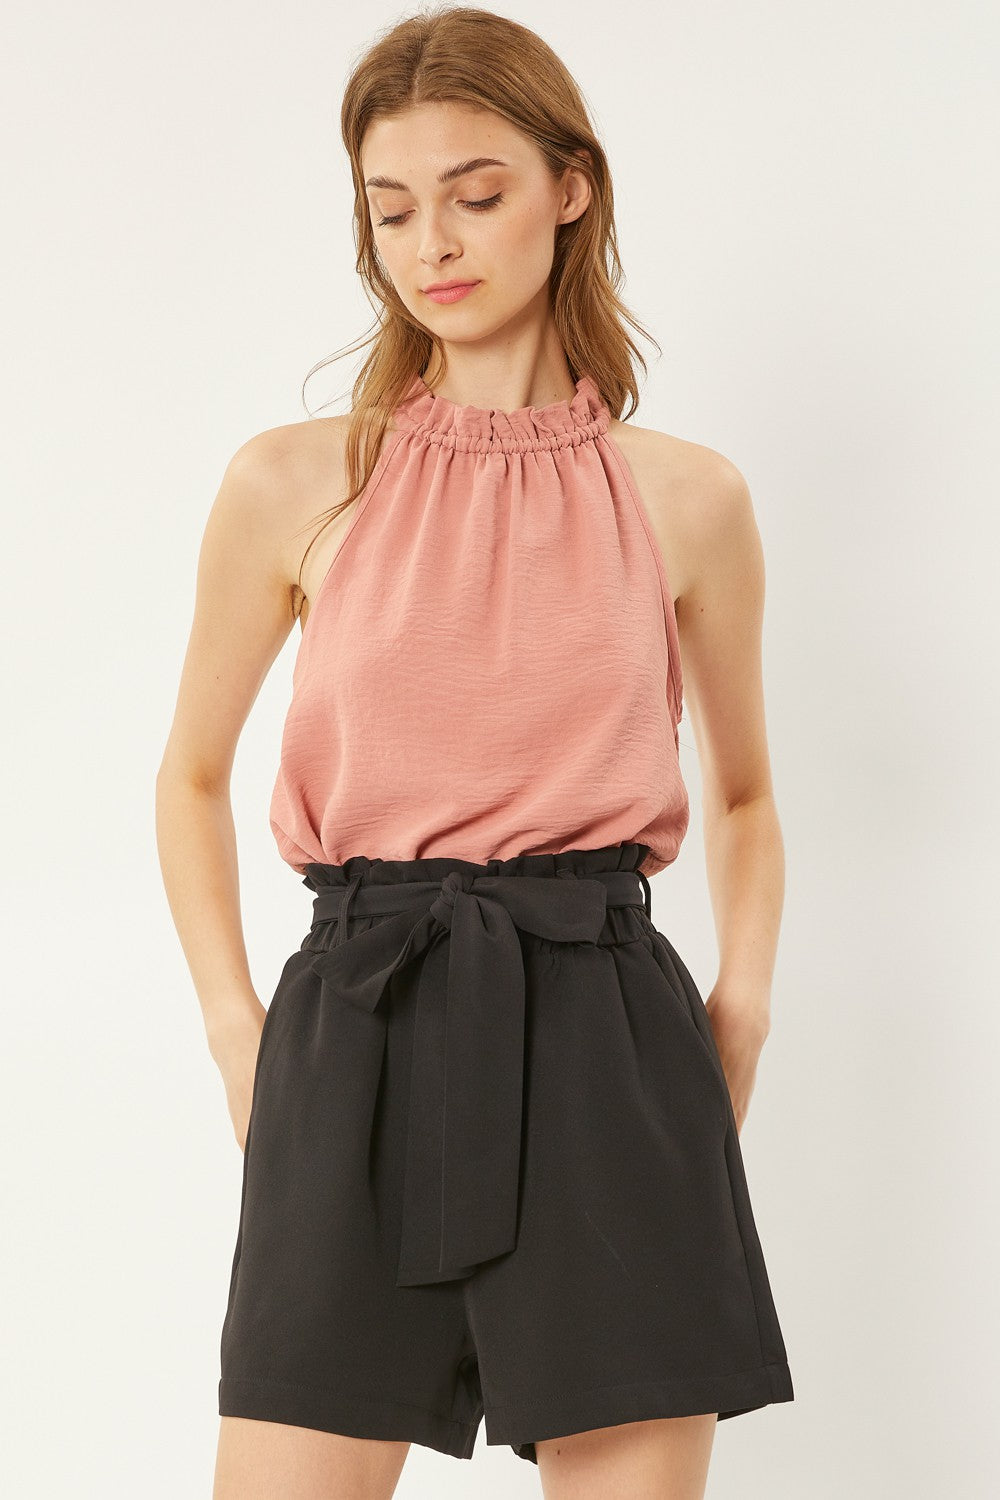 Solid Blush Woven Halter Top